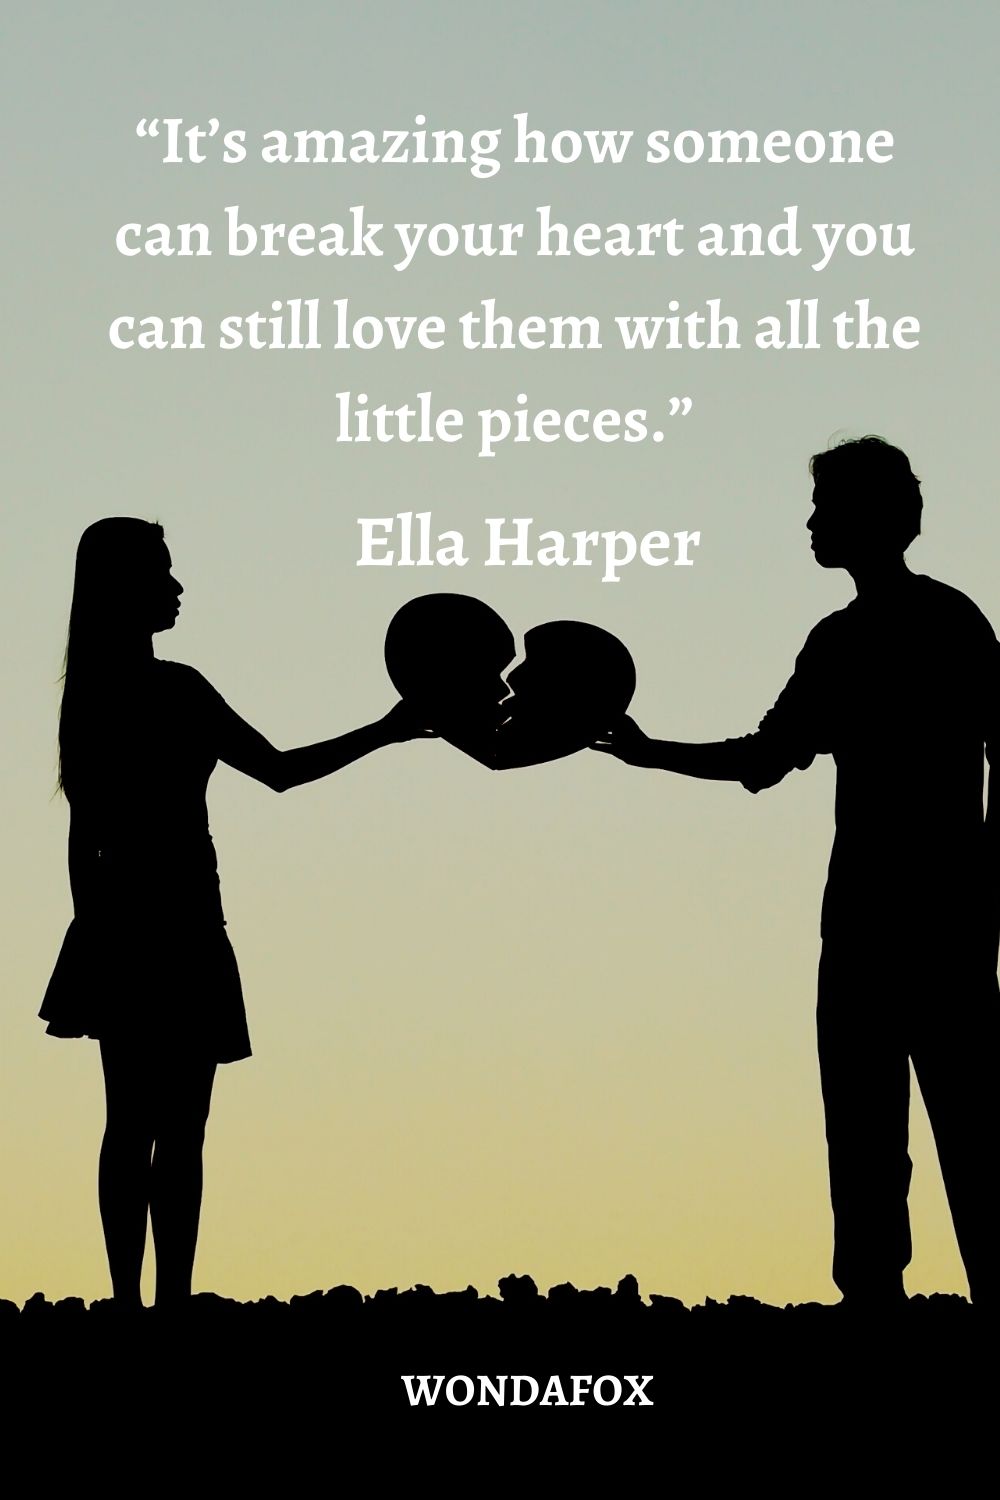 “It’s amazing how someone can break your heart and you can still love them with all the little pieces.”
Ella Harper